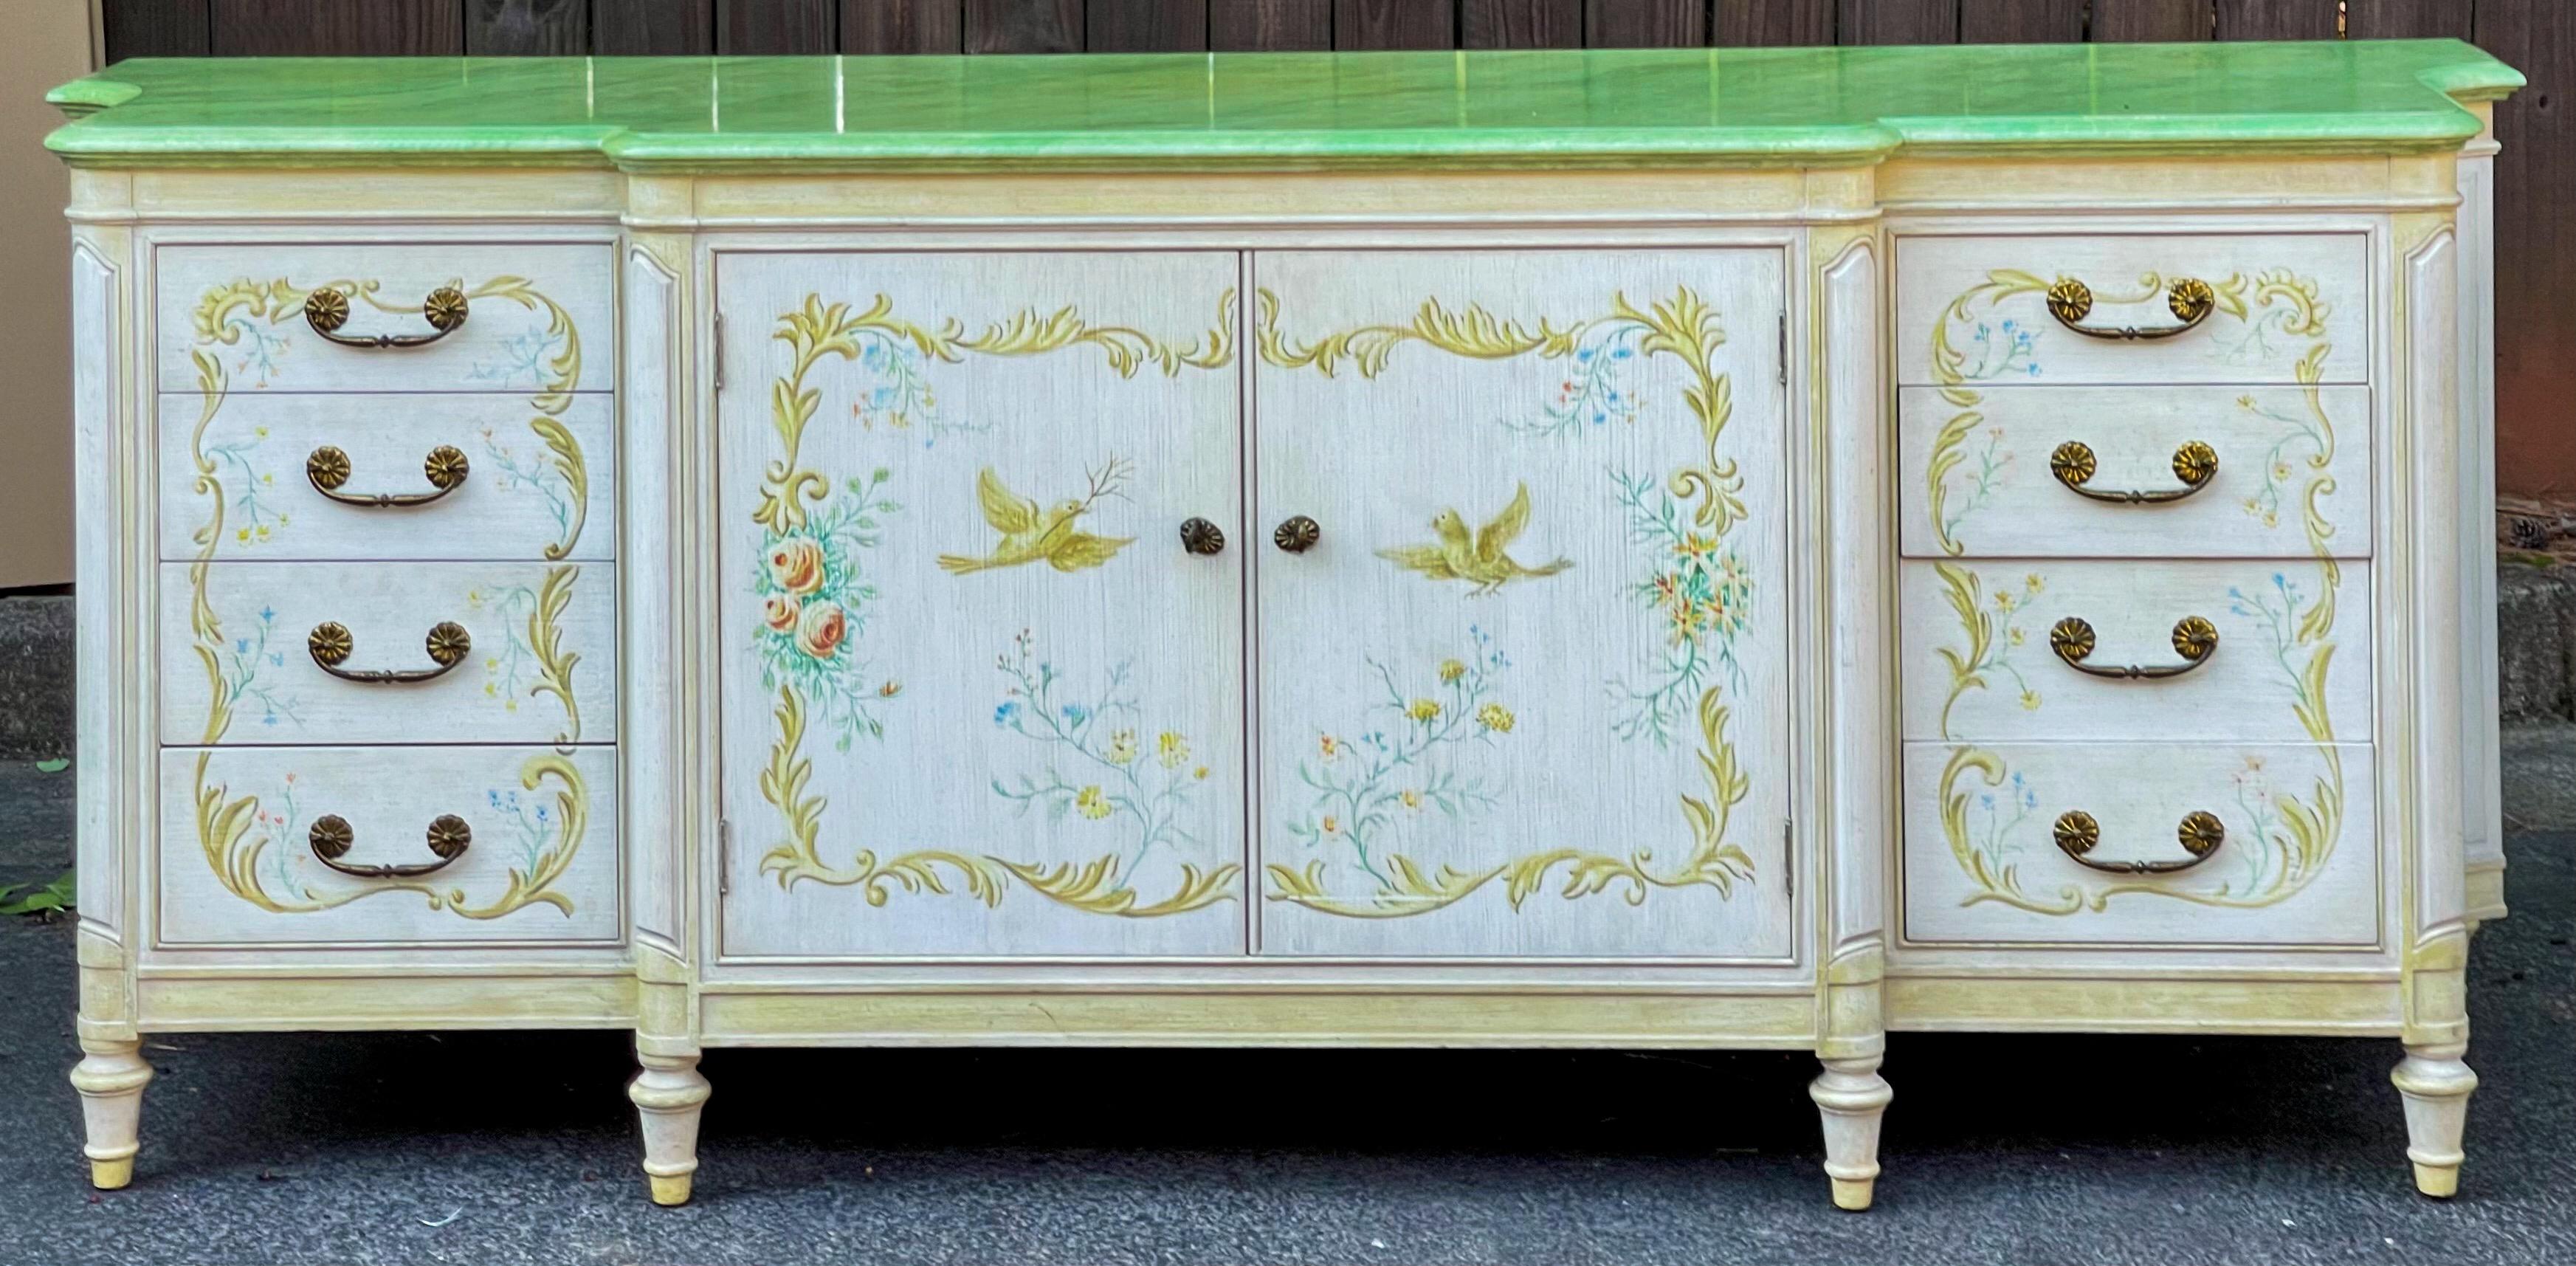 1960s Venetian Style Italian Sideboard / Credenza Or Cabinet W/ Faux Marble Top In Good Condition For Sale In Kennesaw, GA